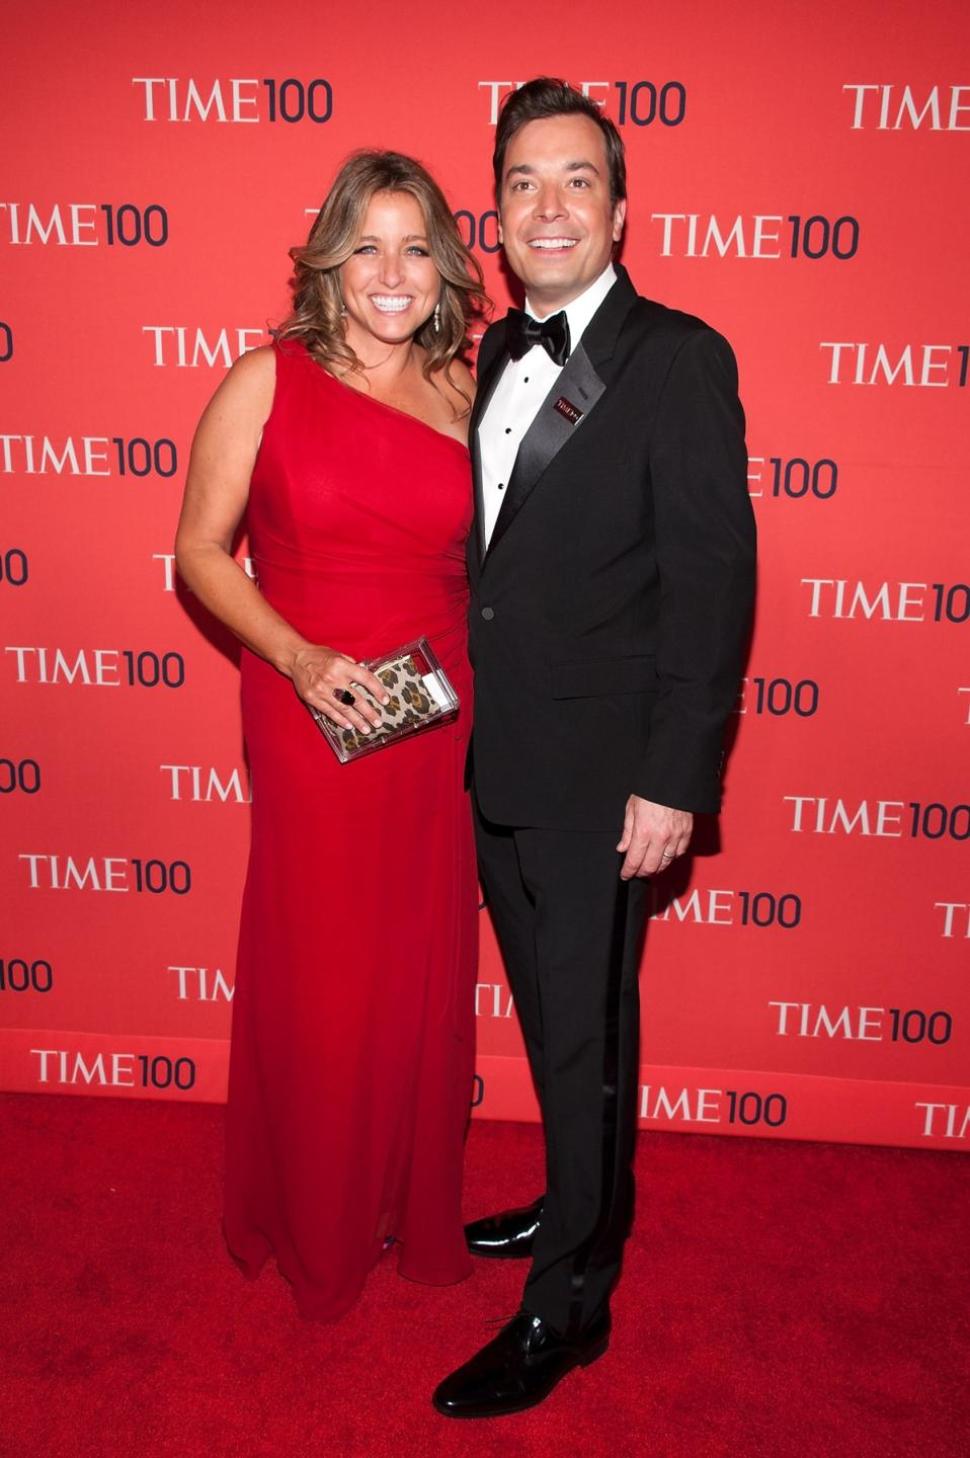 Jimmy Fallon (right) and wife Nancy Juvonen attend the 2013 Time 100 Gala in New York City. The couple announced Wednesday they had welcomed a second child.